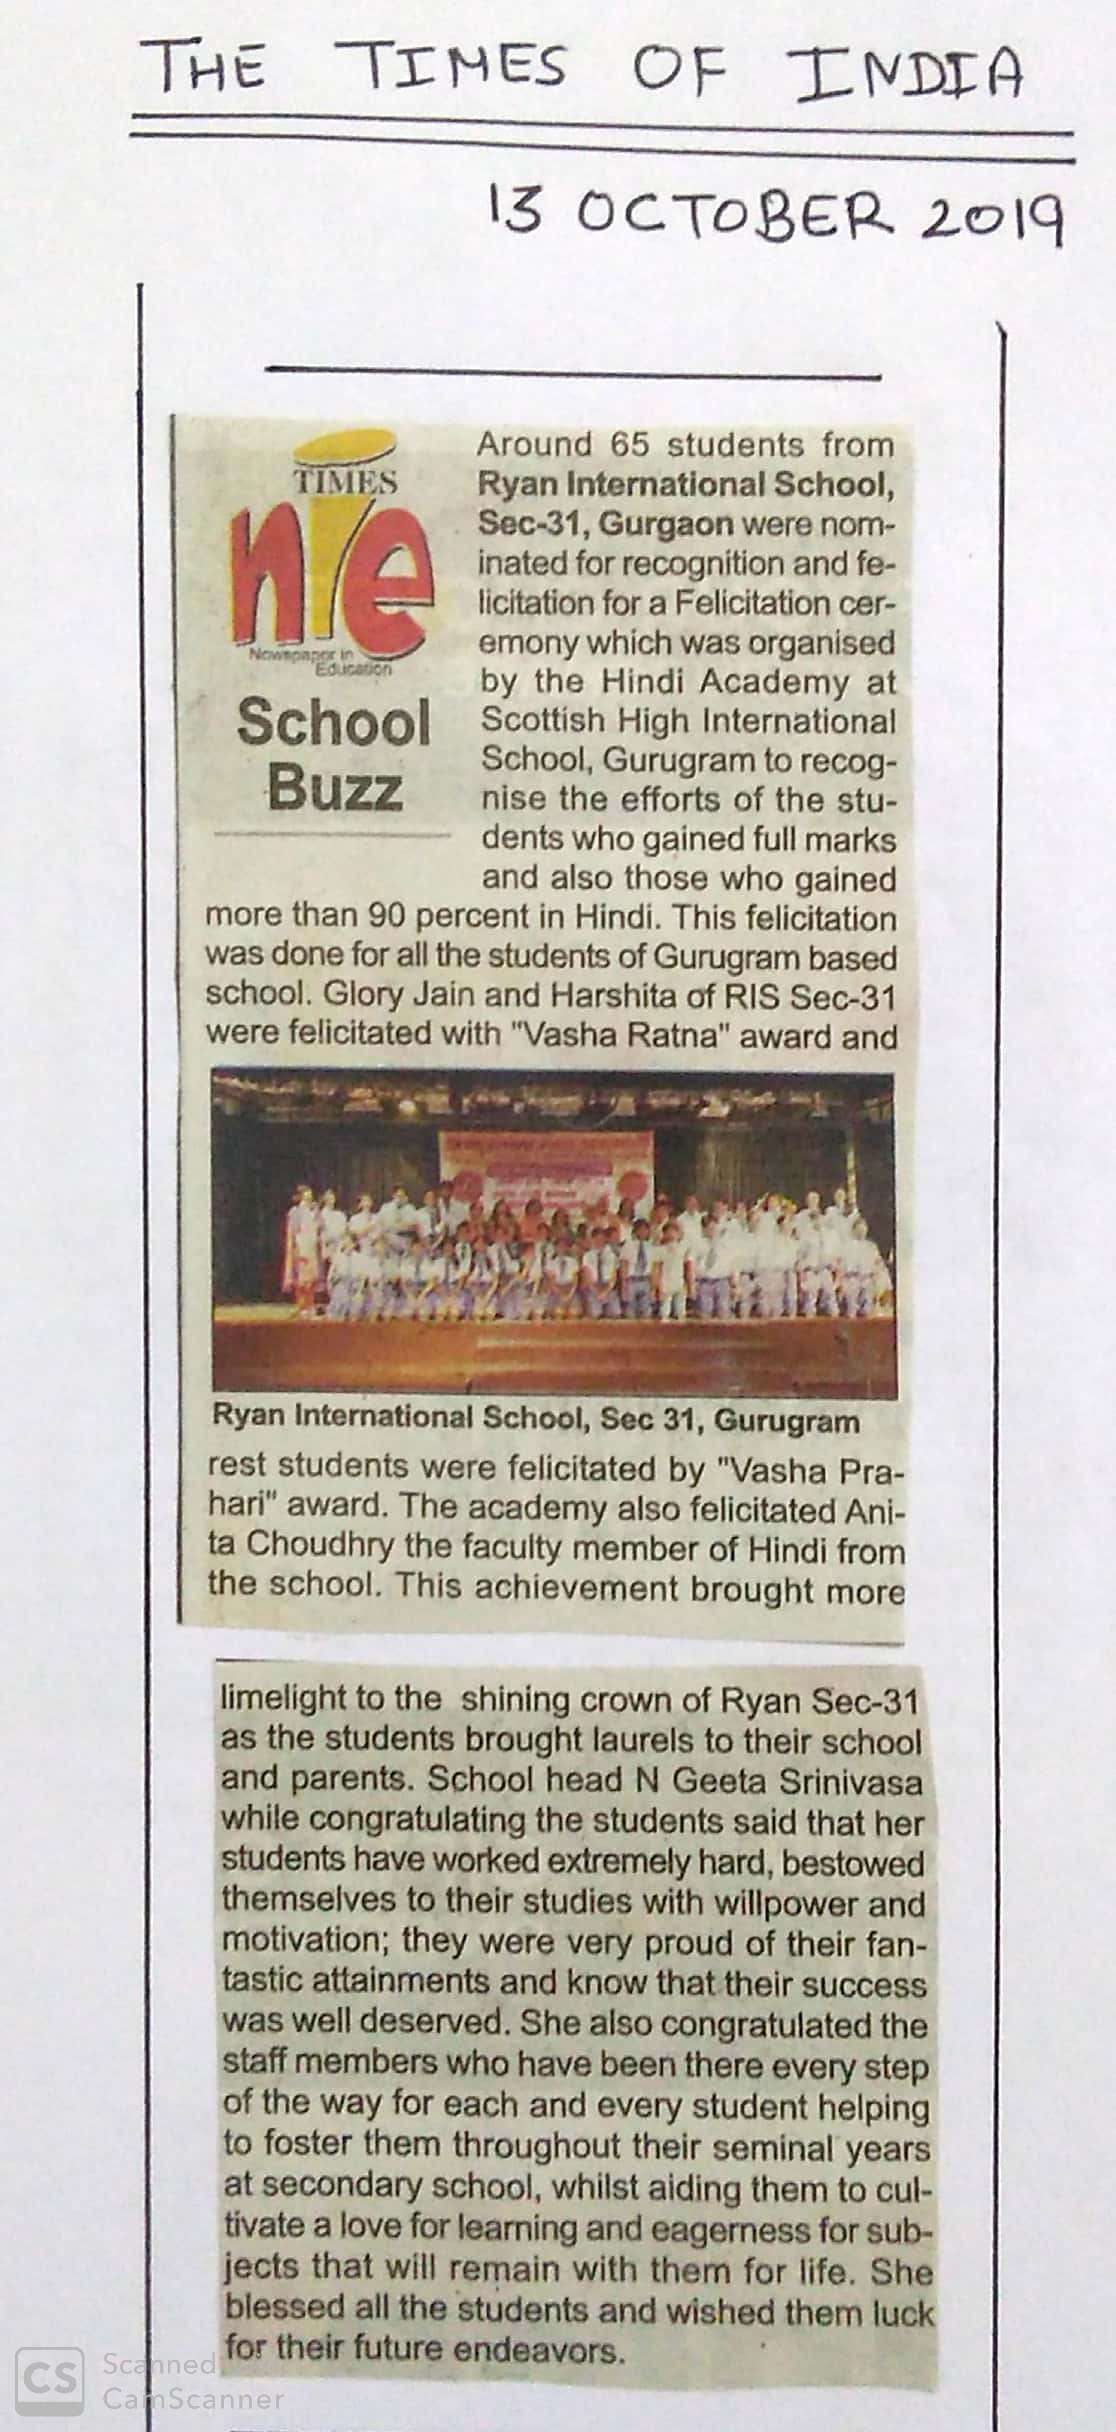 Around 65 students of Ryan International School Gurgaon Sector 31 were for a Felicitation ceremony to recognise efforts of students to scored full marks in Hindi - Ryan International School, Sec 31 Gurgaon